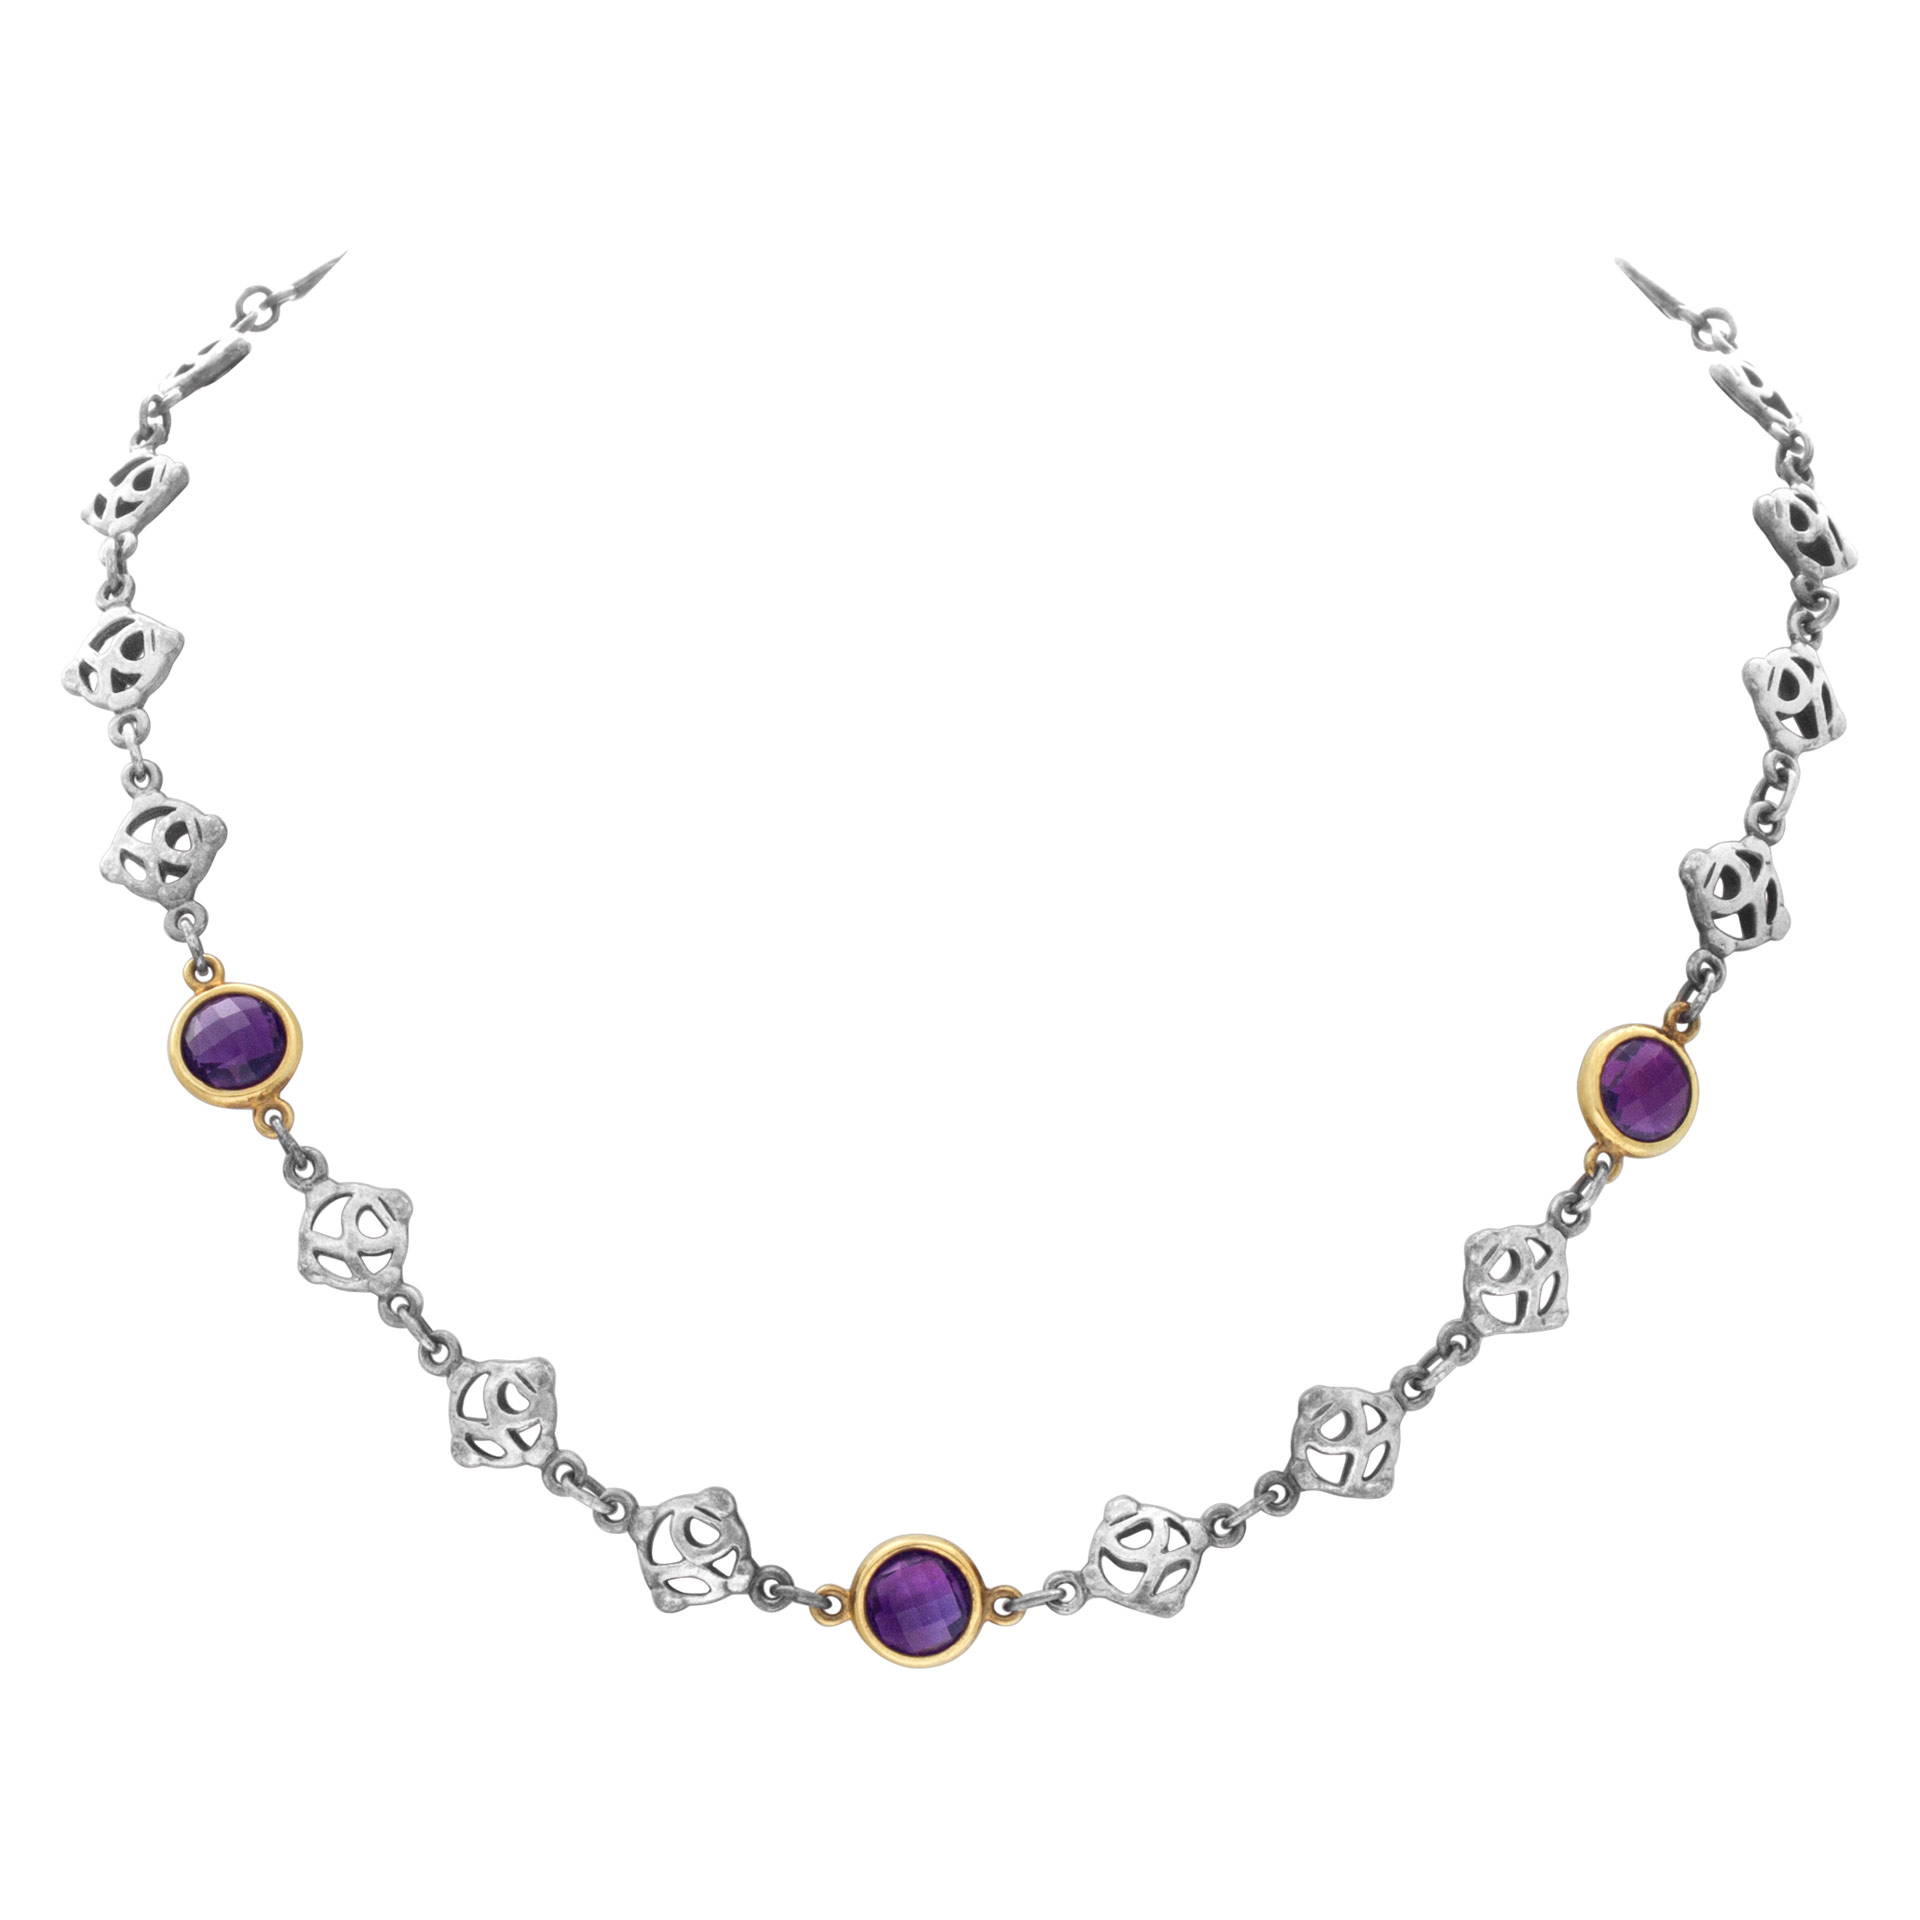 David Yurman necklace in sterling silver with 14k set amethyst accents image 1